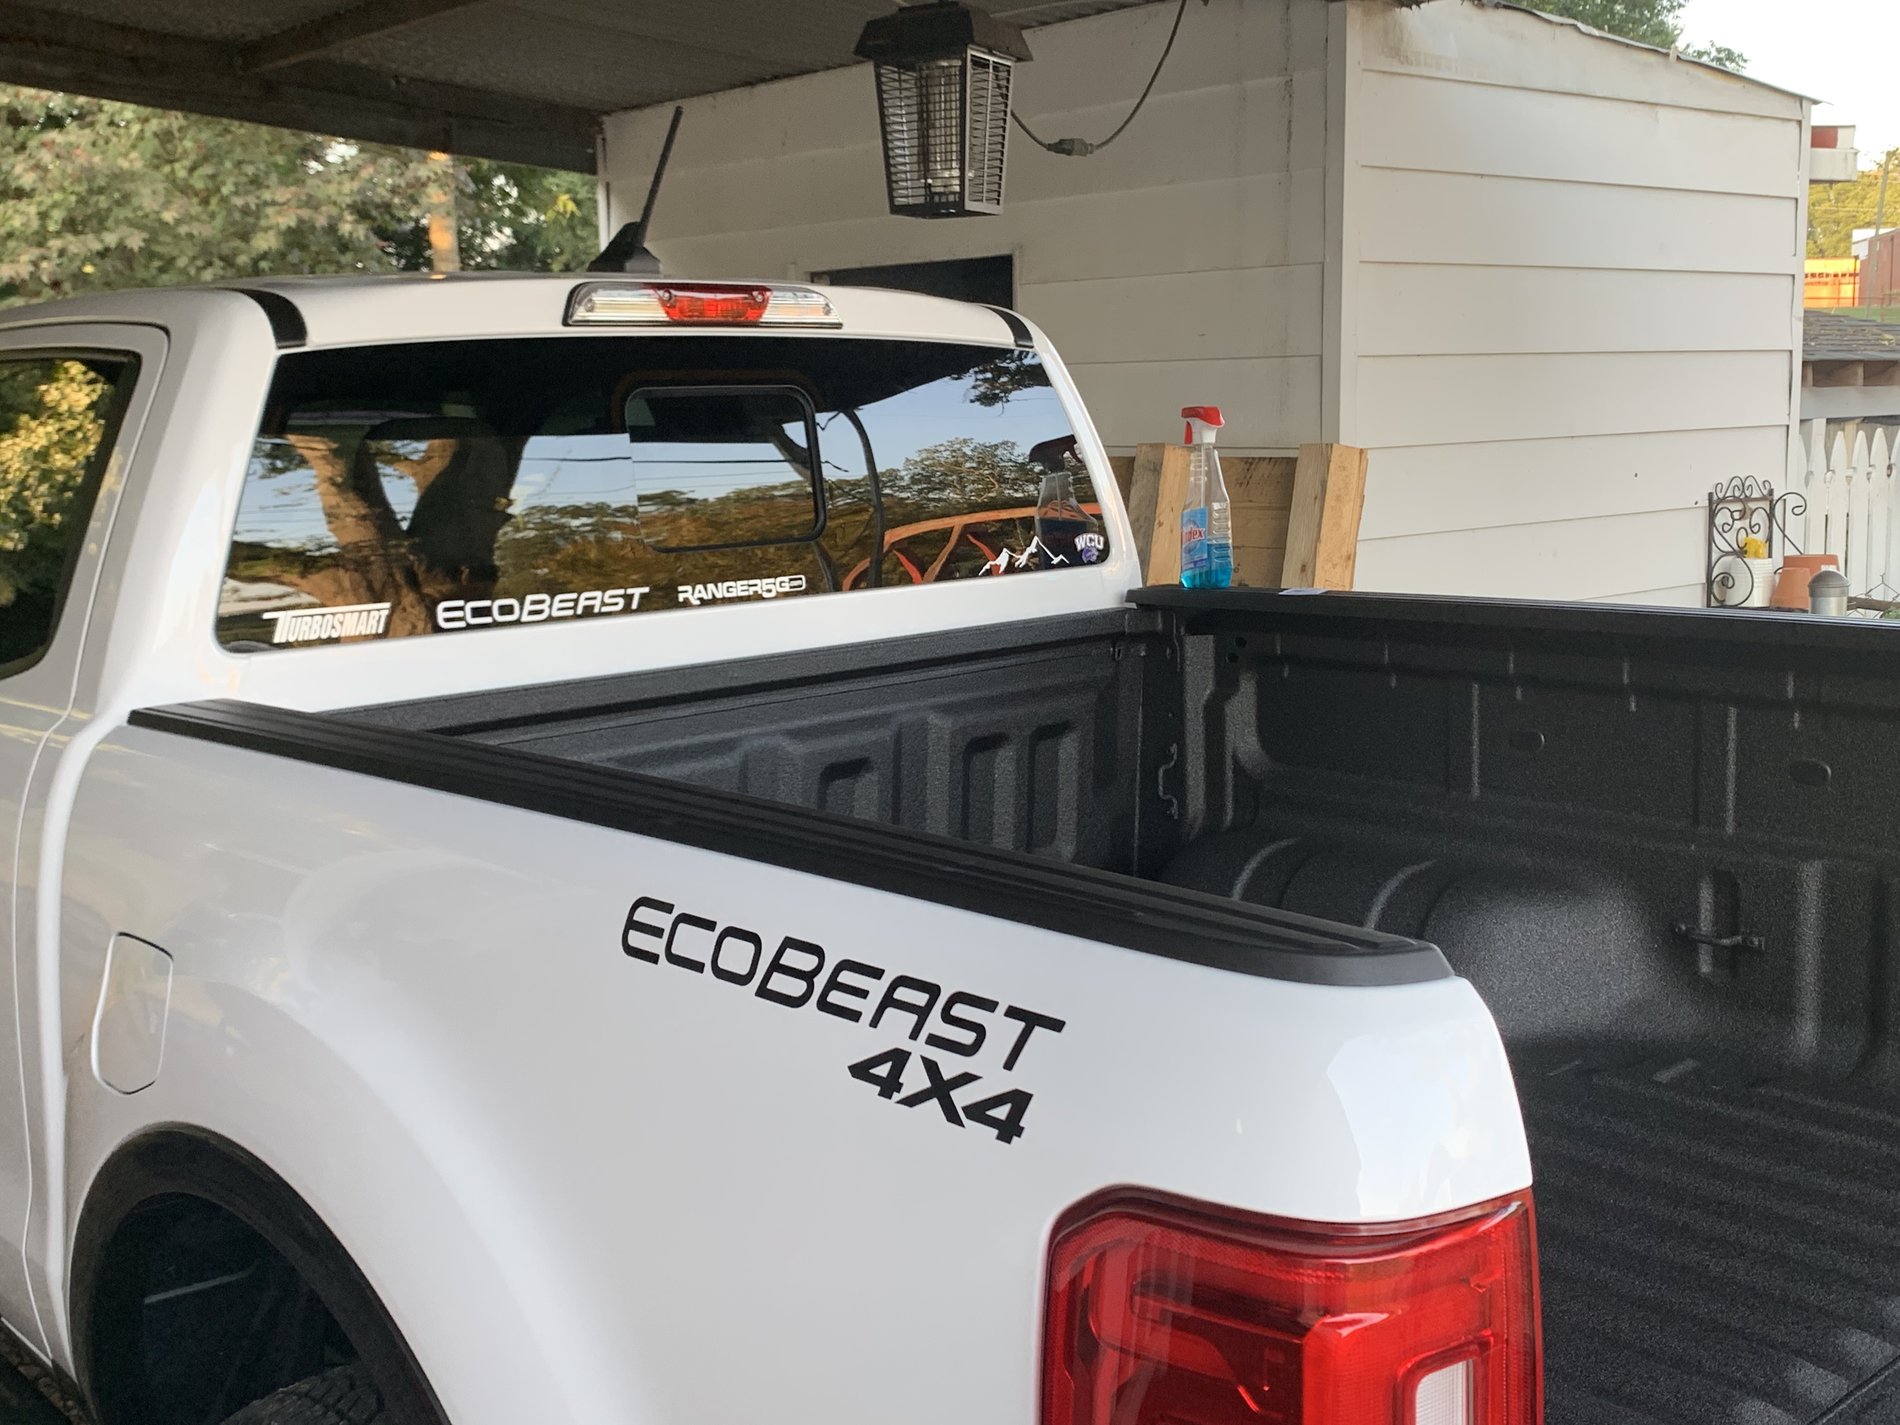 Ford Ranger Lets see those Cab window decals!! 9CCE590F-374D-4EEE-983B-1F046E6273E3